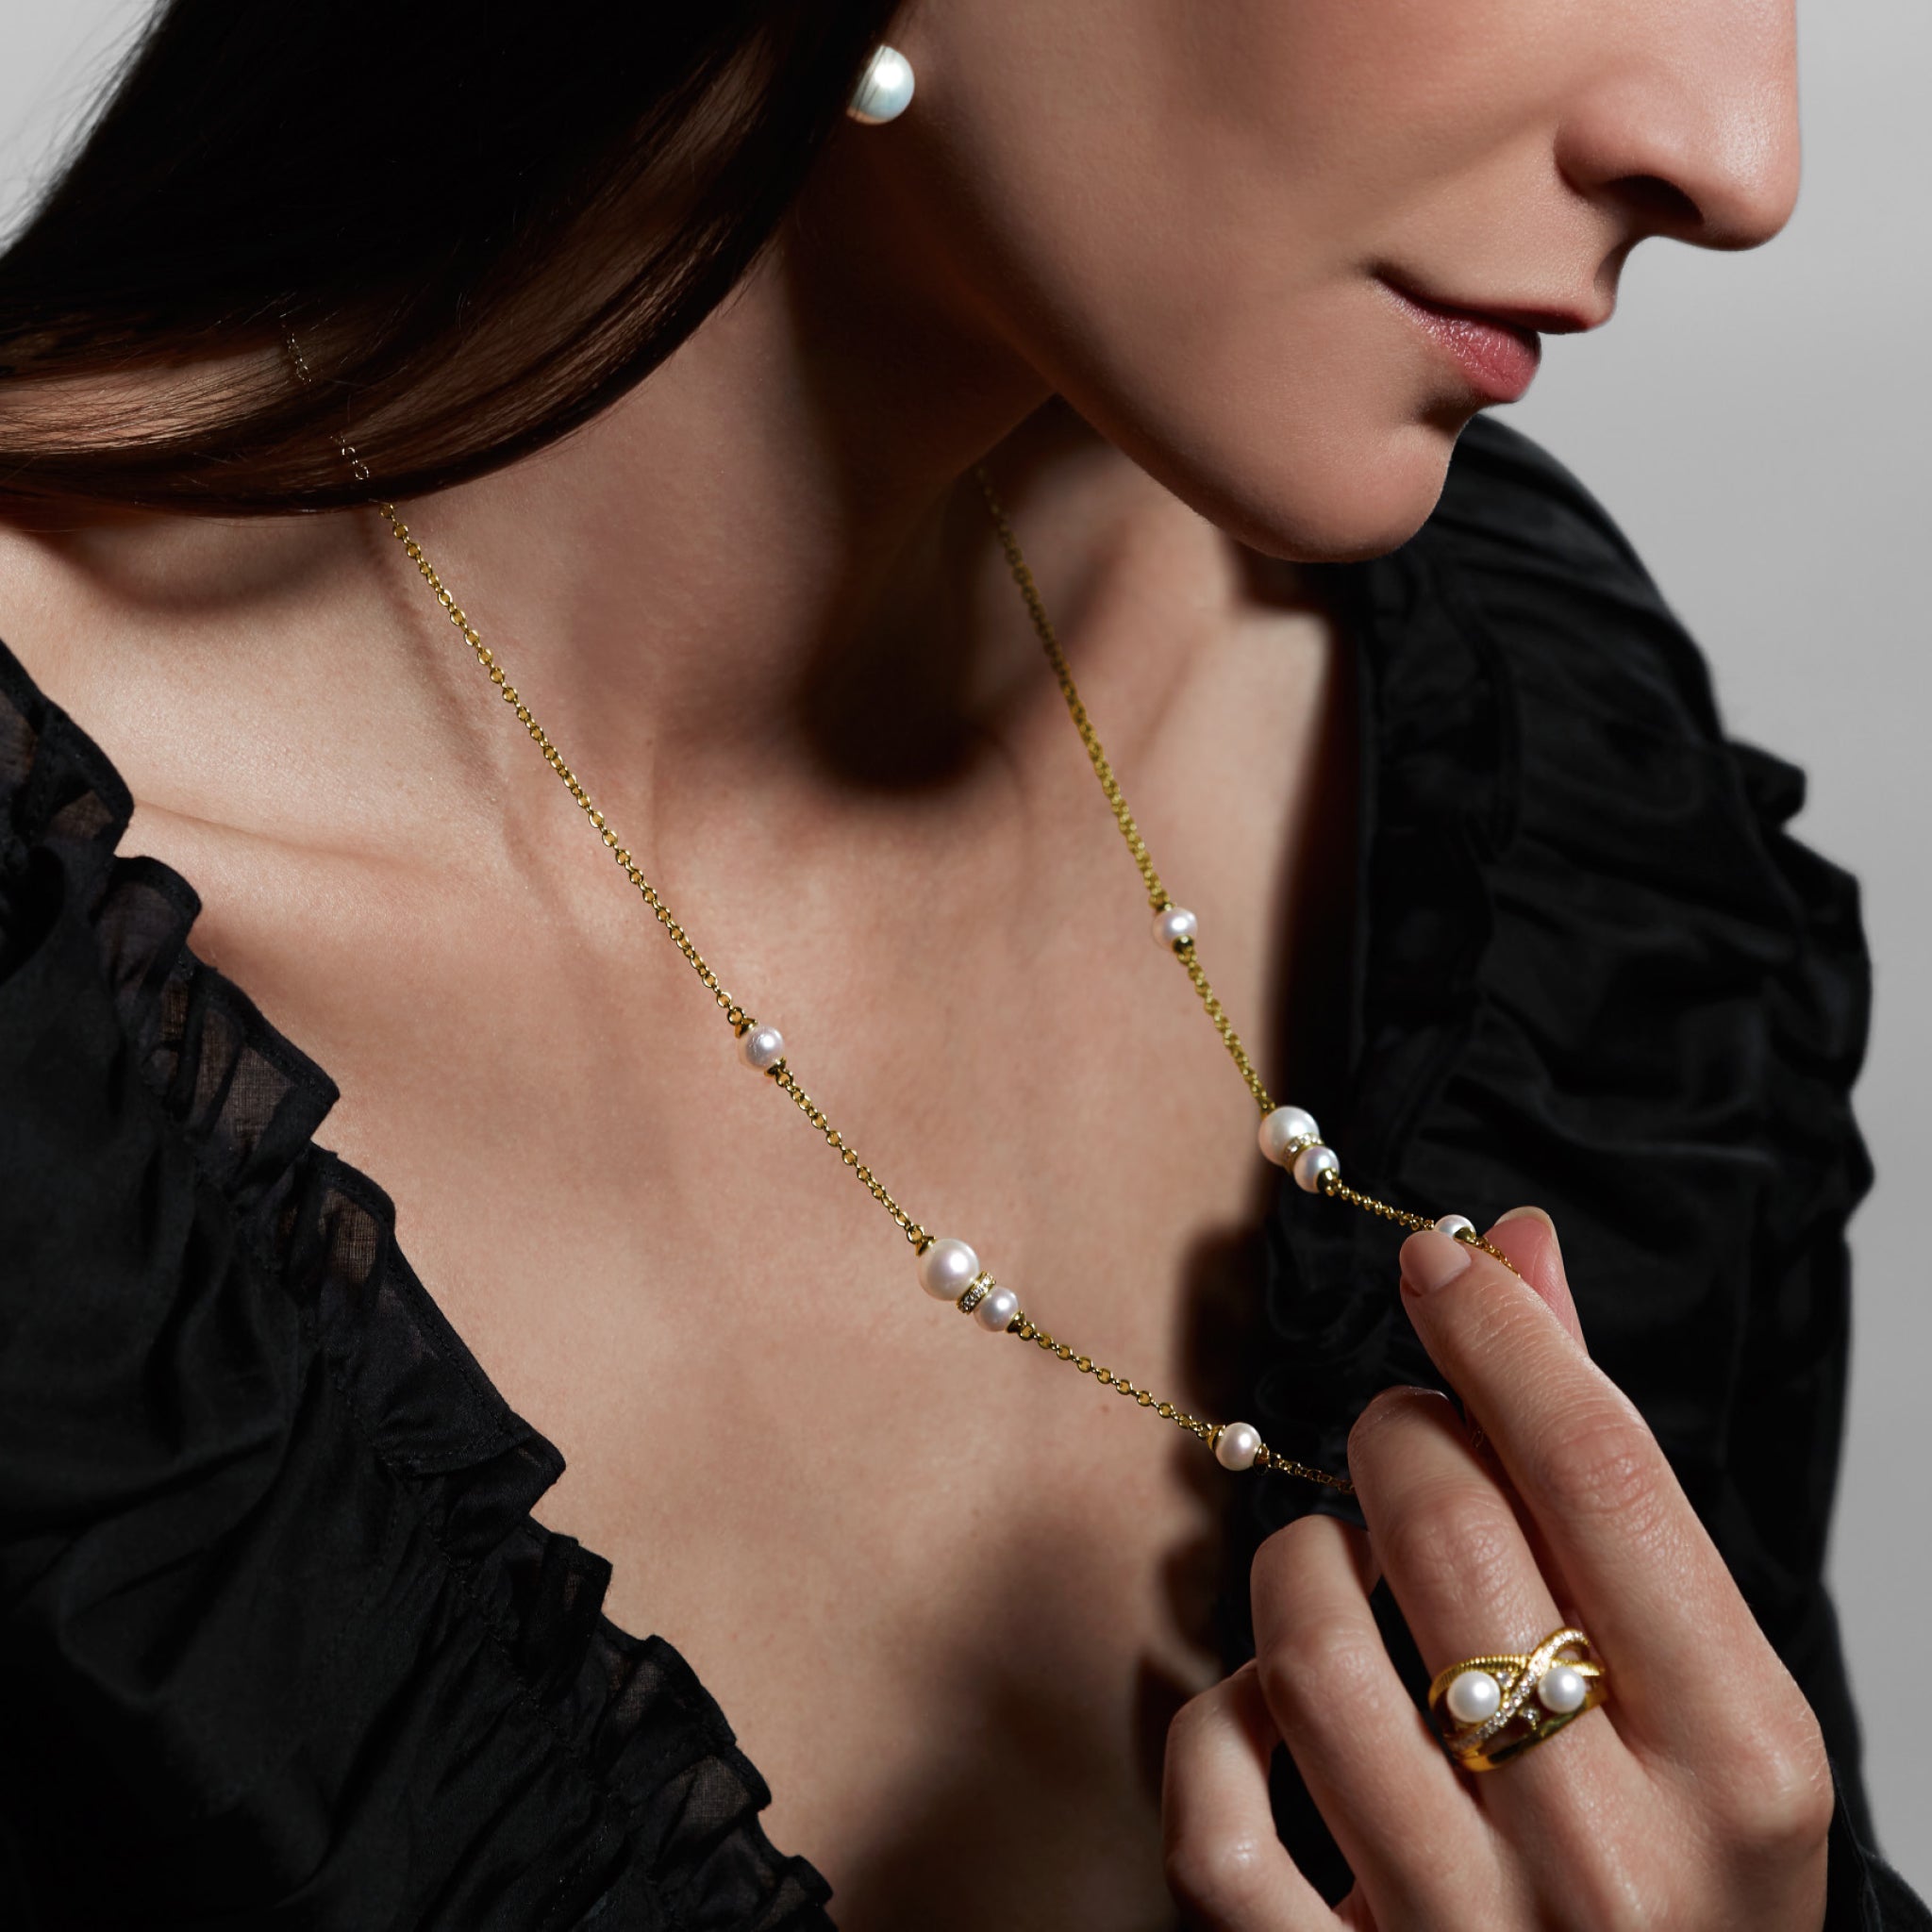 Shima Station Necklace with Freshwater Pearls and Diamonds in 18K